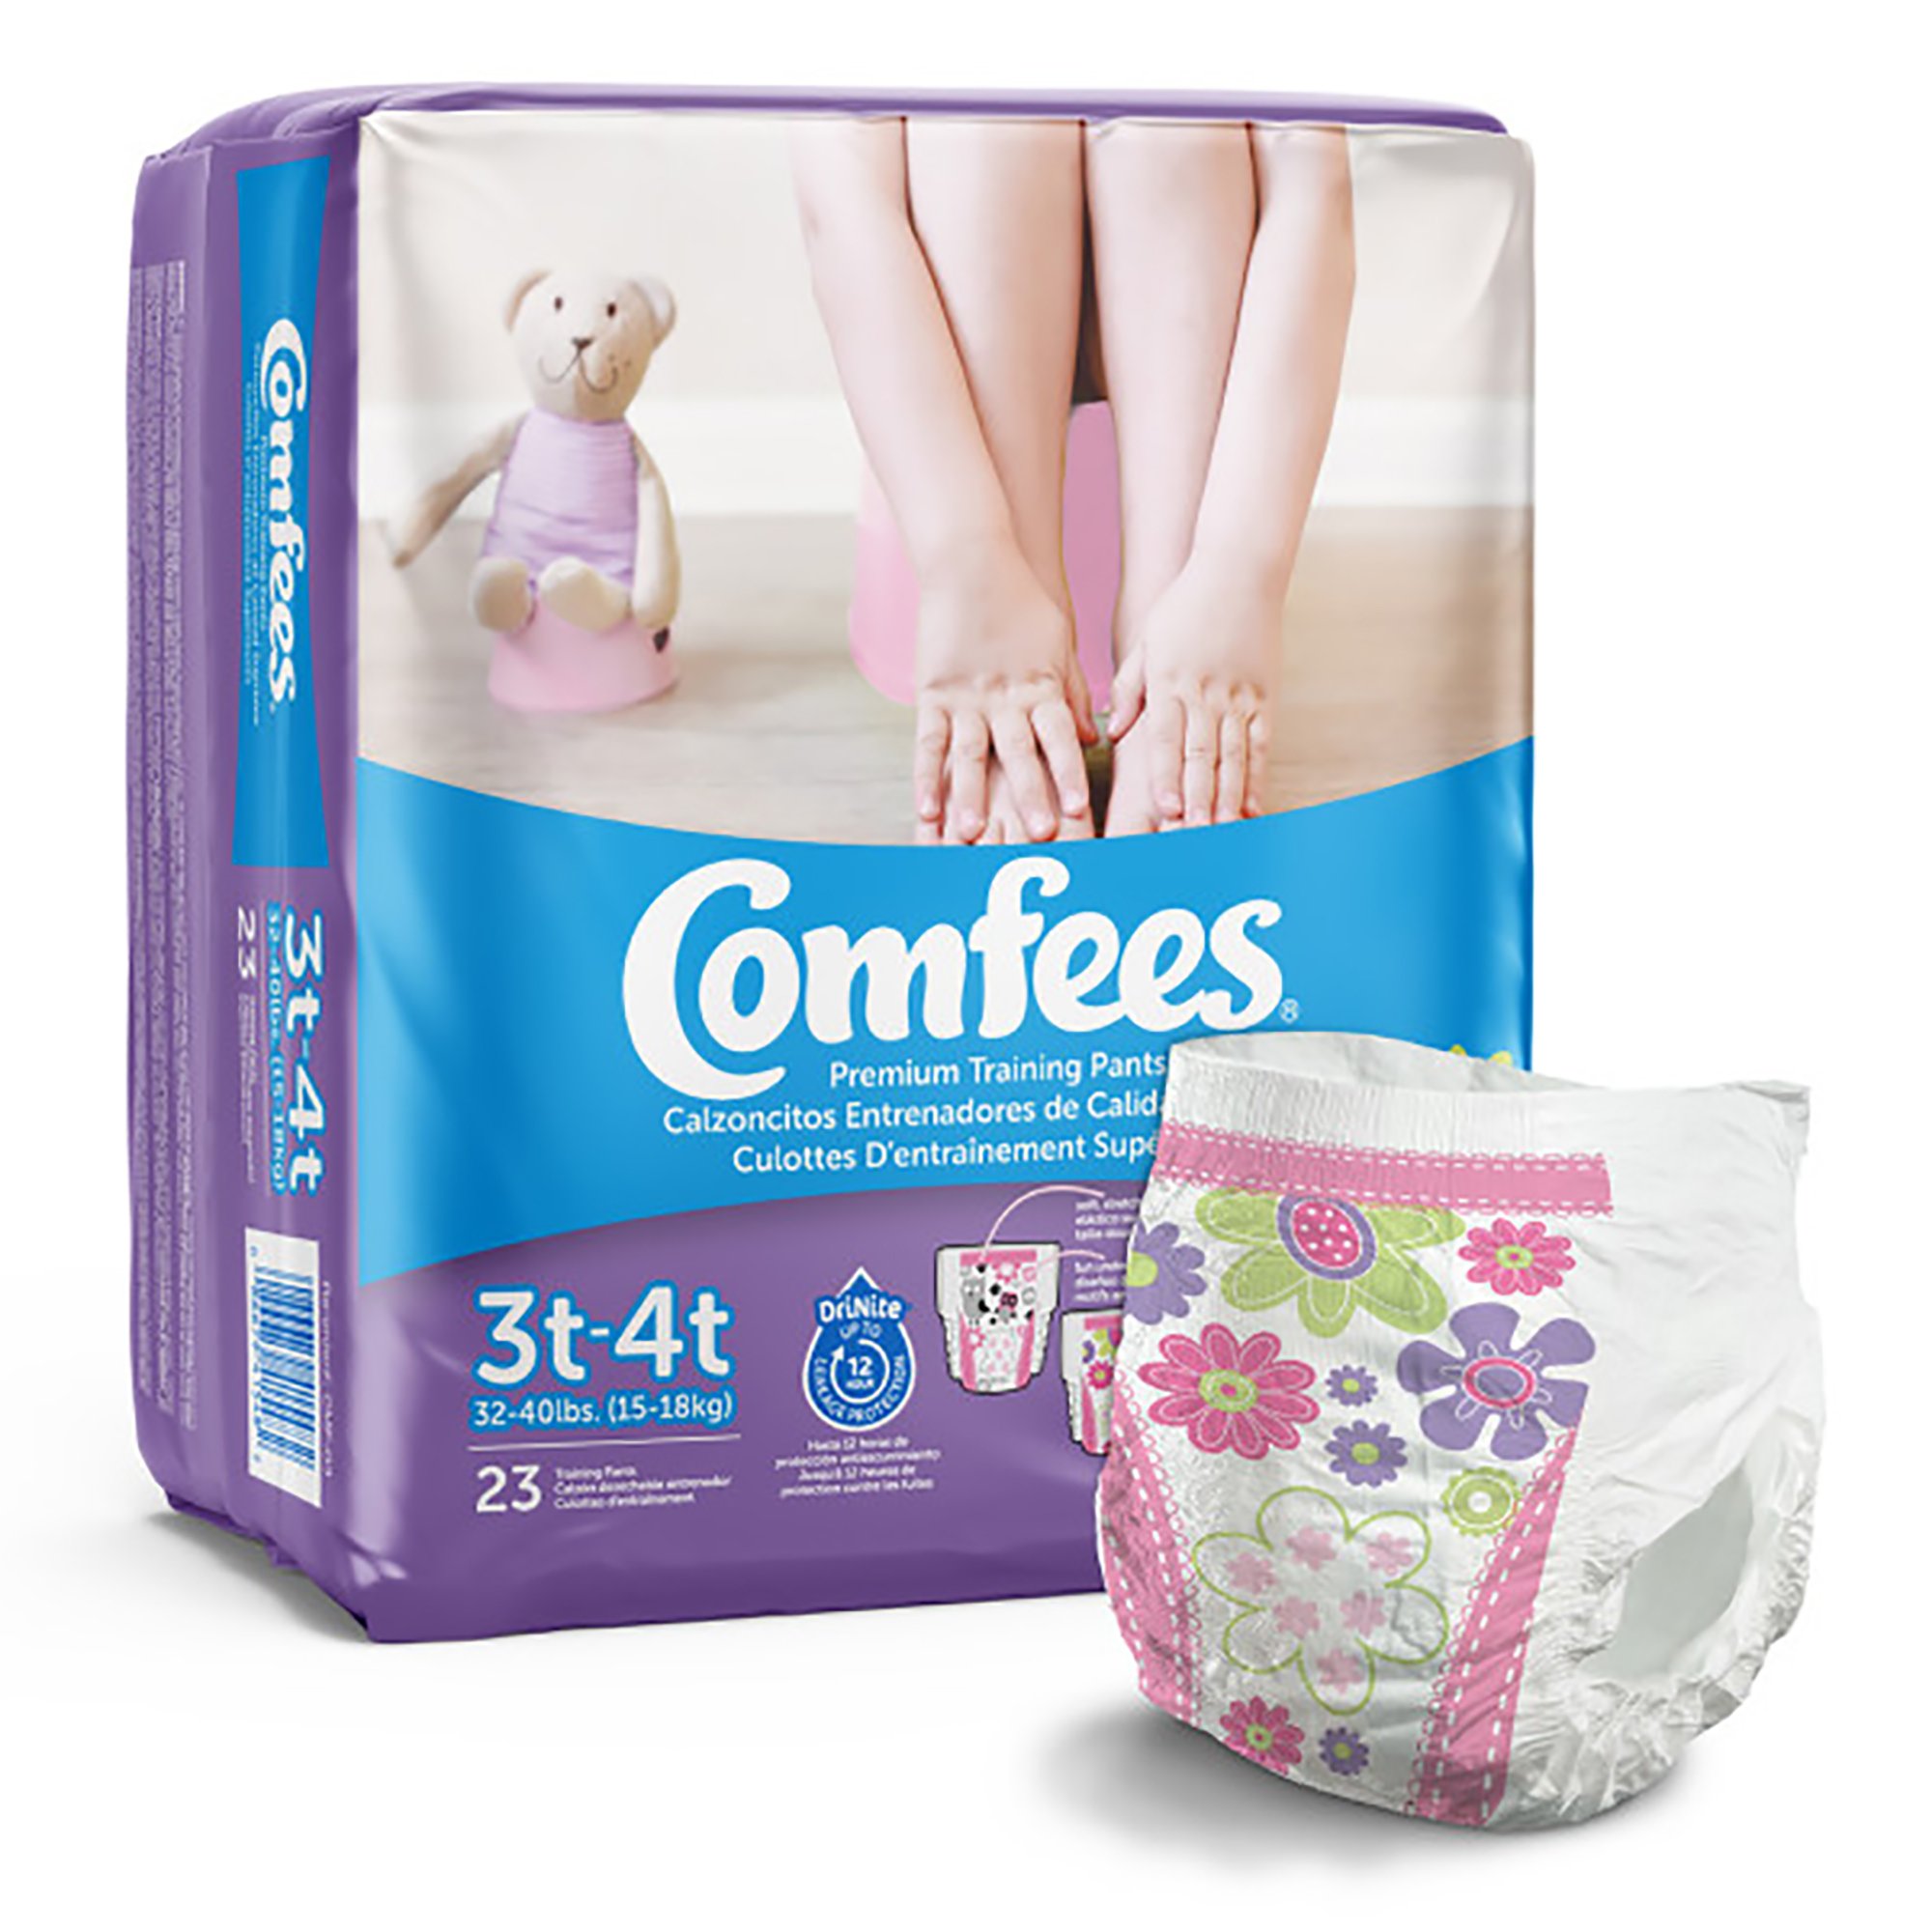 Comfees Training Pants for Girls, DriNite 12-hr Leakage Protection, 3T-4T, 23 Count, 6 Packs, 138 Total - image 2 of 5